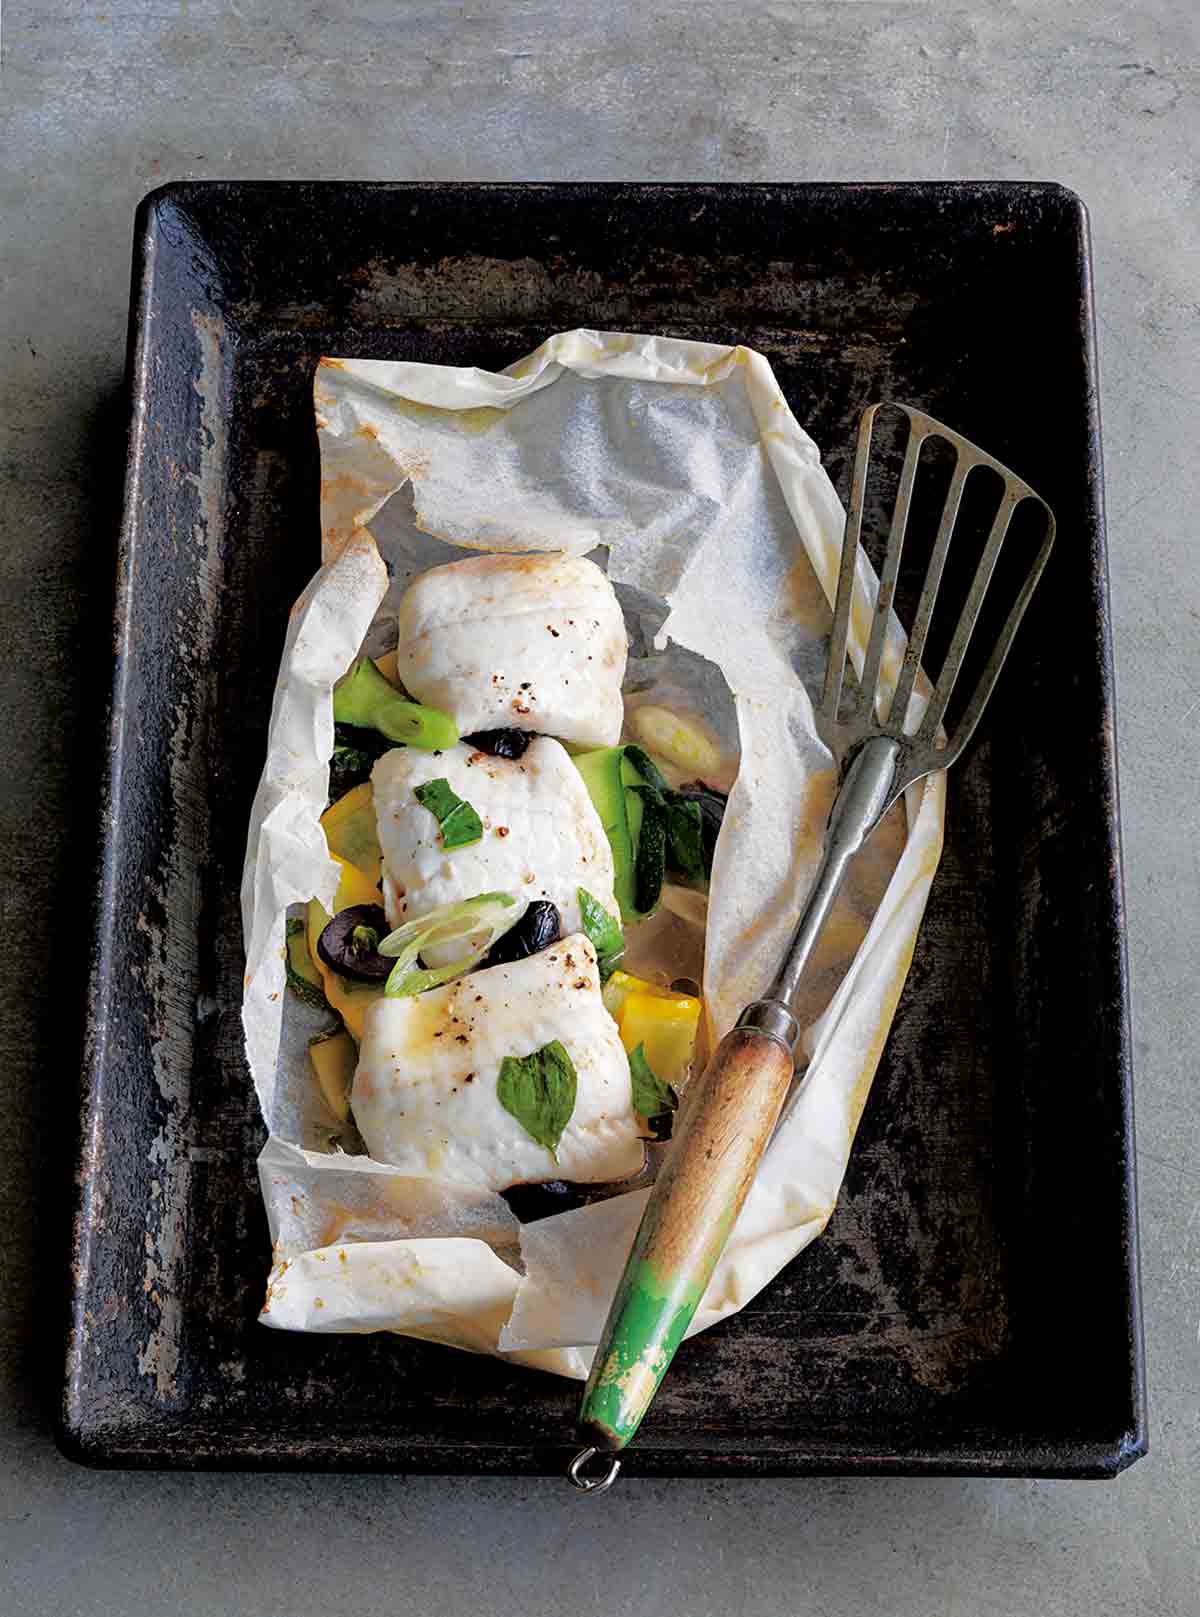 A rimmed baking sheet with fish in parchment and a fish spatula resting beside it.